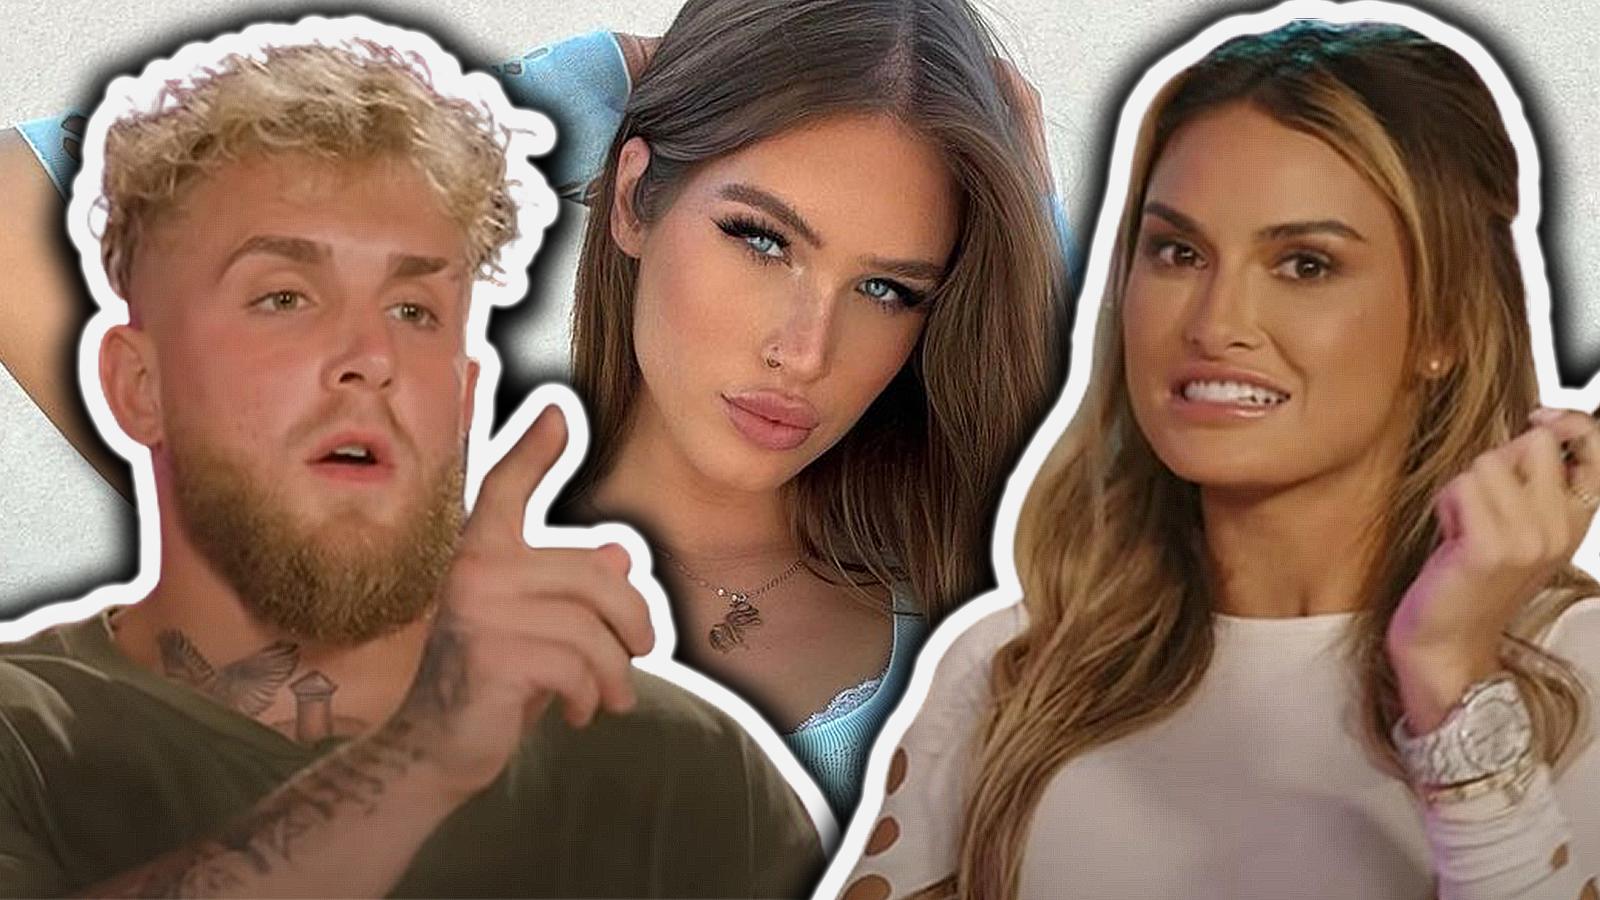 Sky Bri claims Jake Paul made her post about hookup to spite Julia Rose